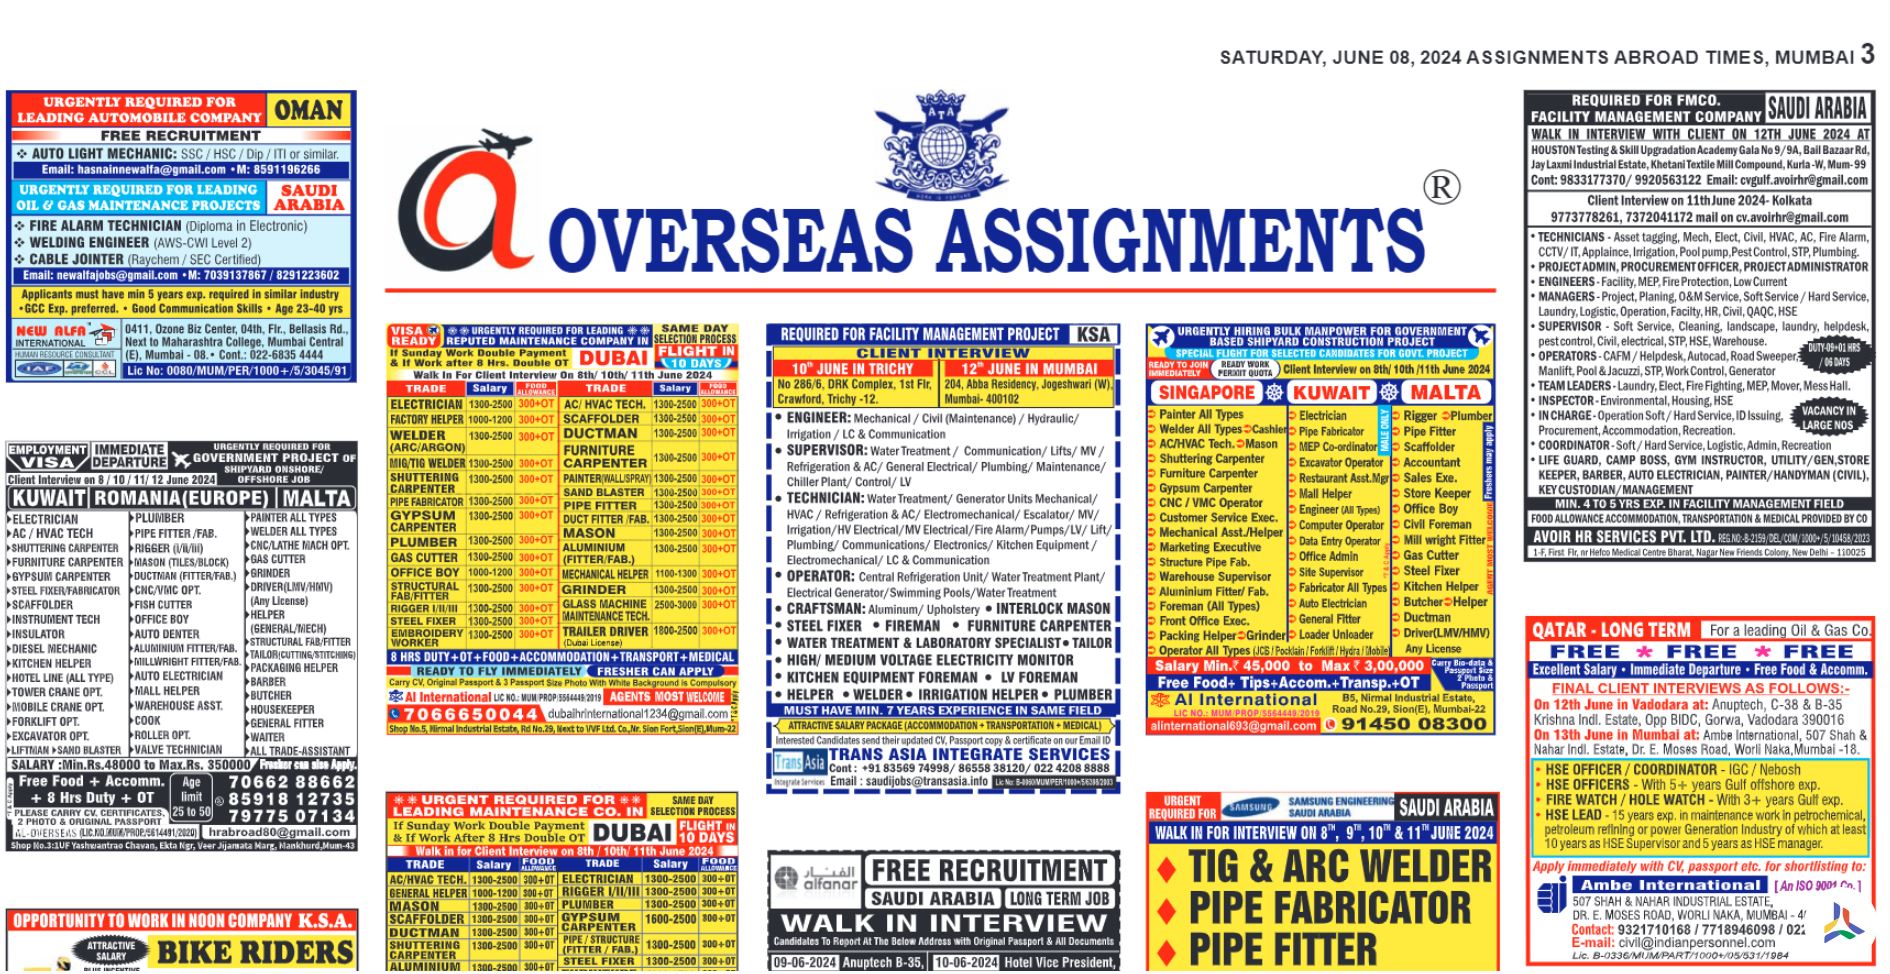 assignment abroad times e newspaper